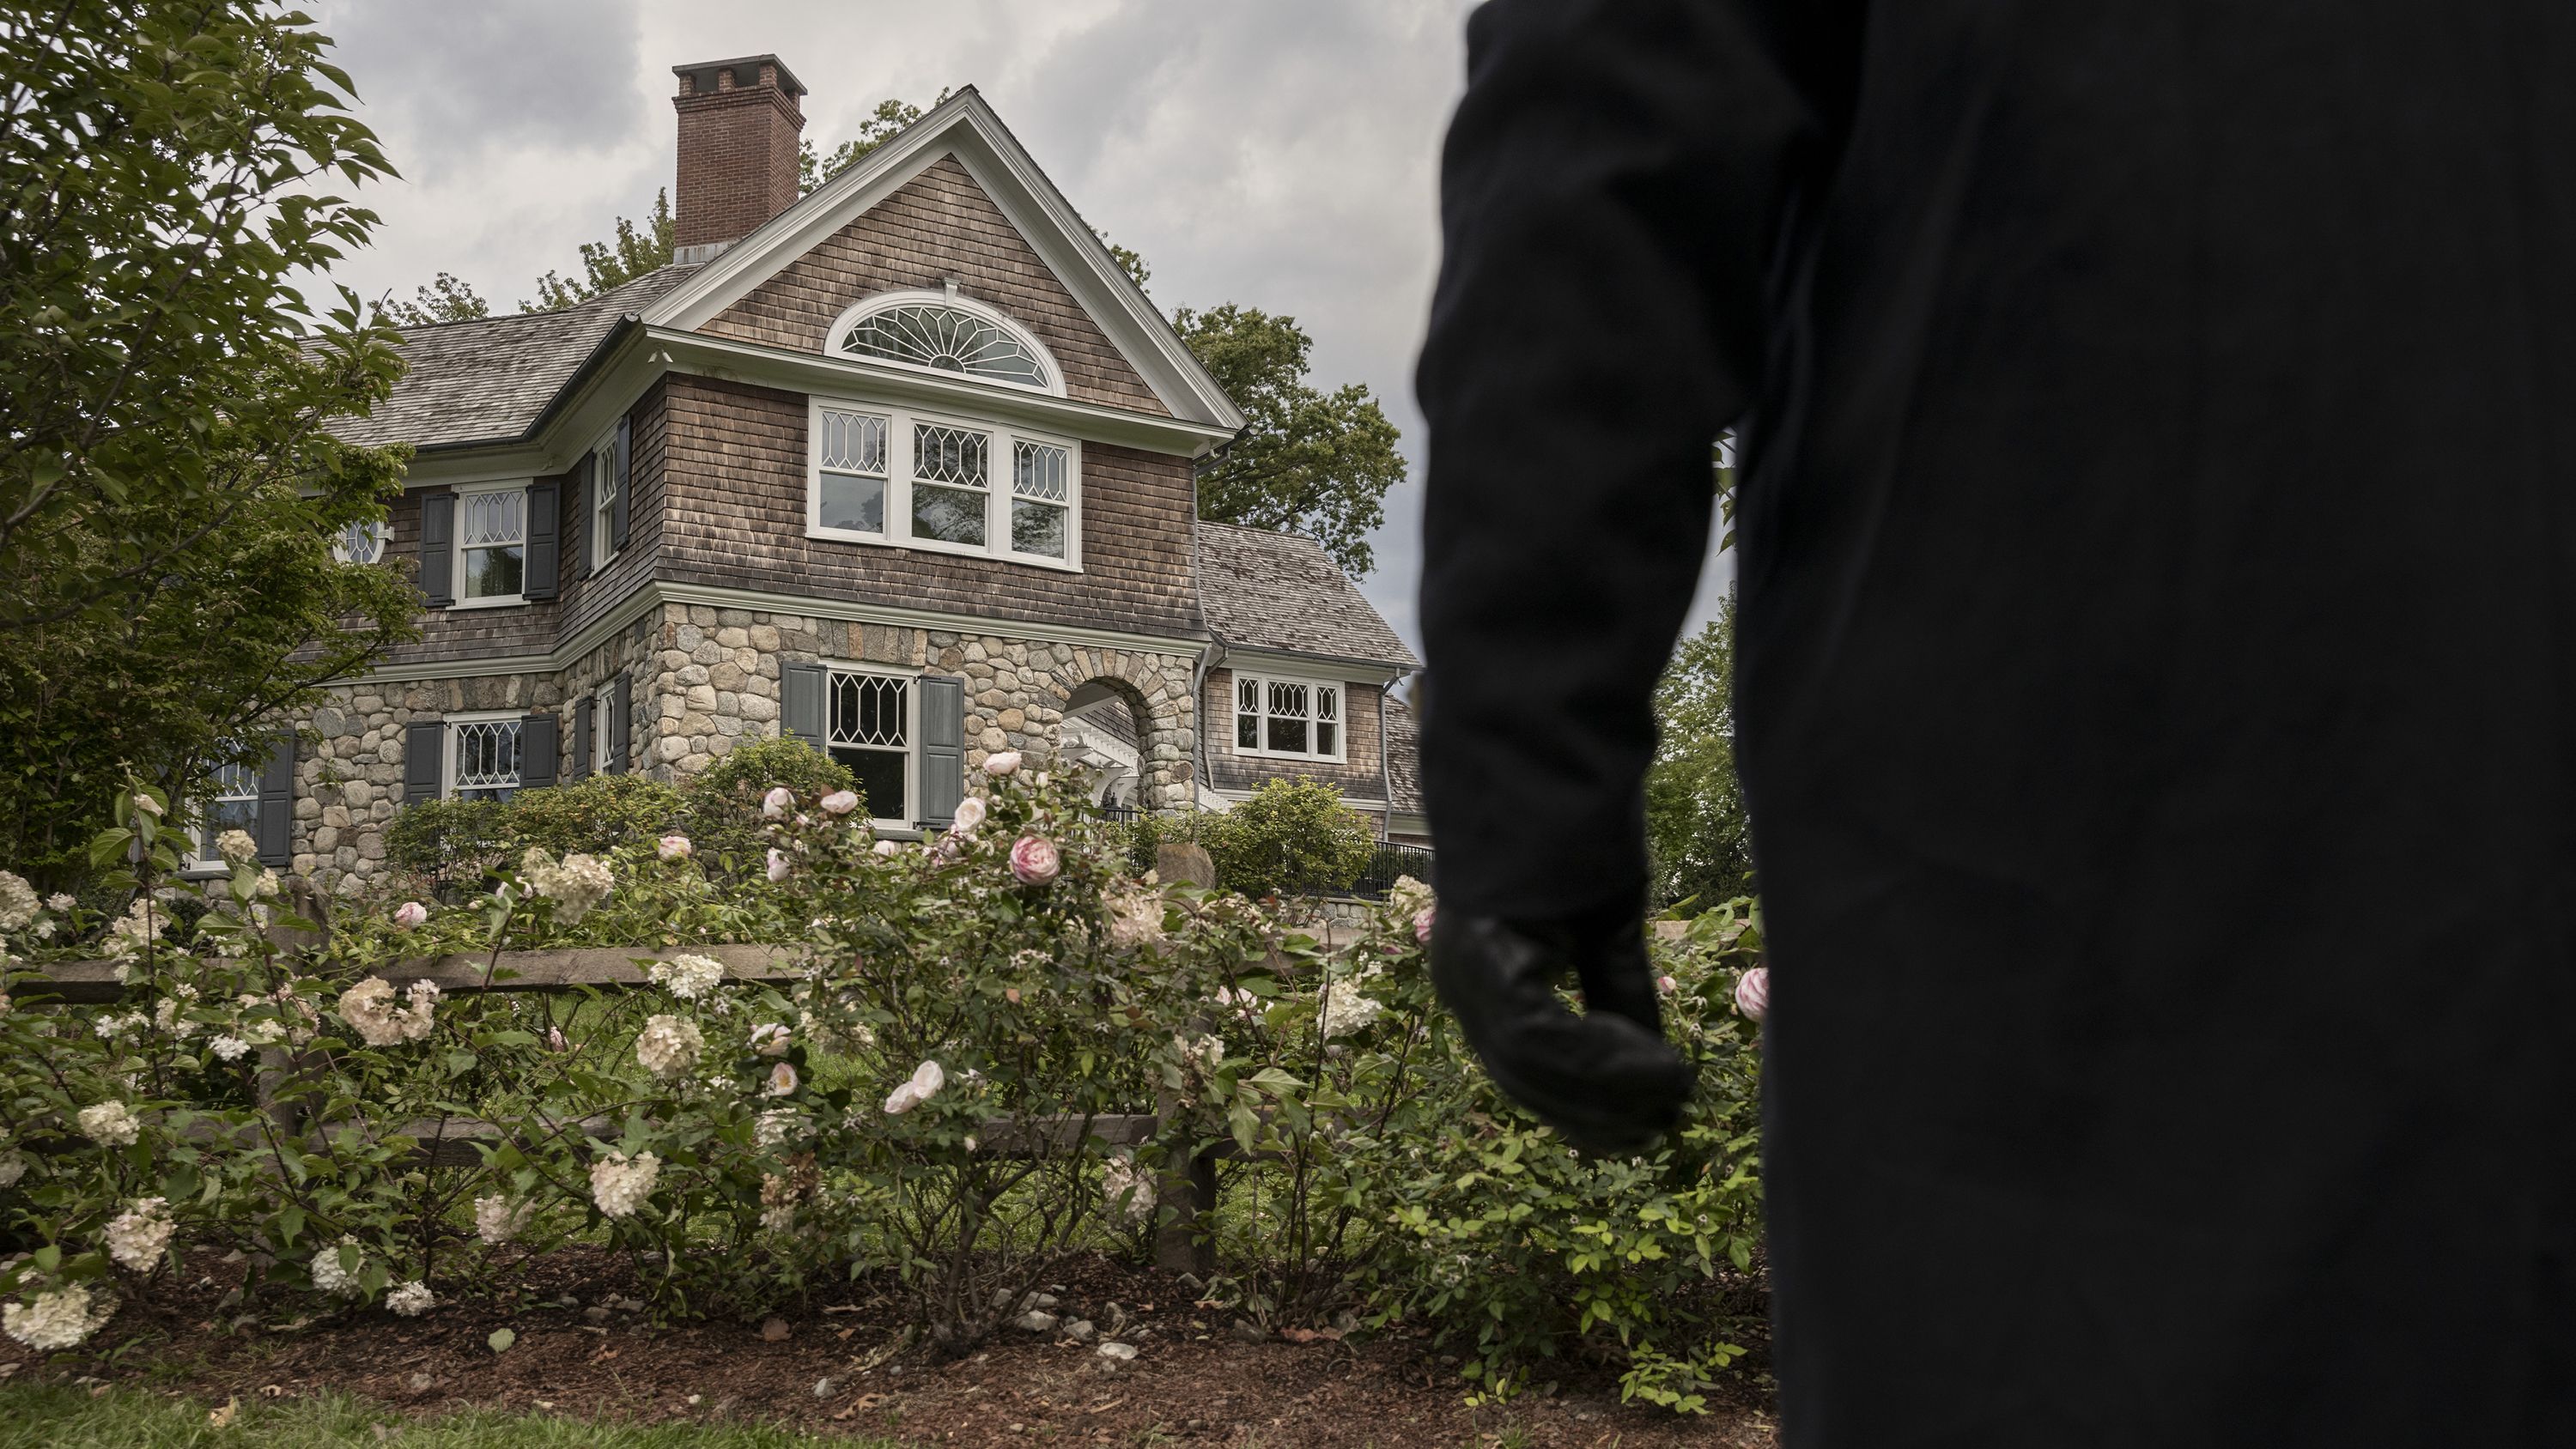 Inside the real-life 'Watcher House' versus the Netflix home